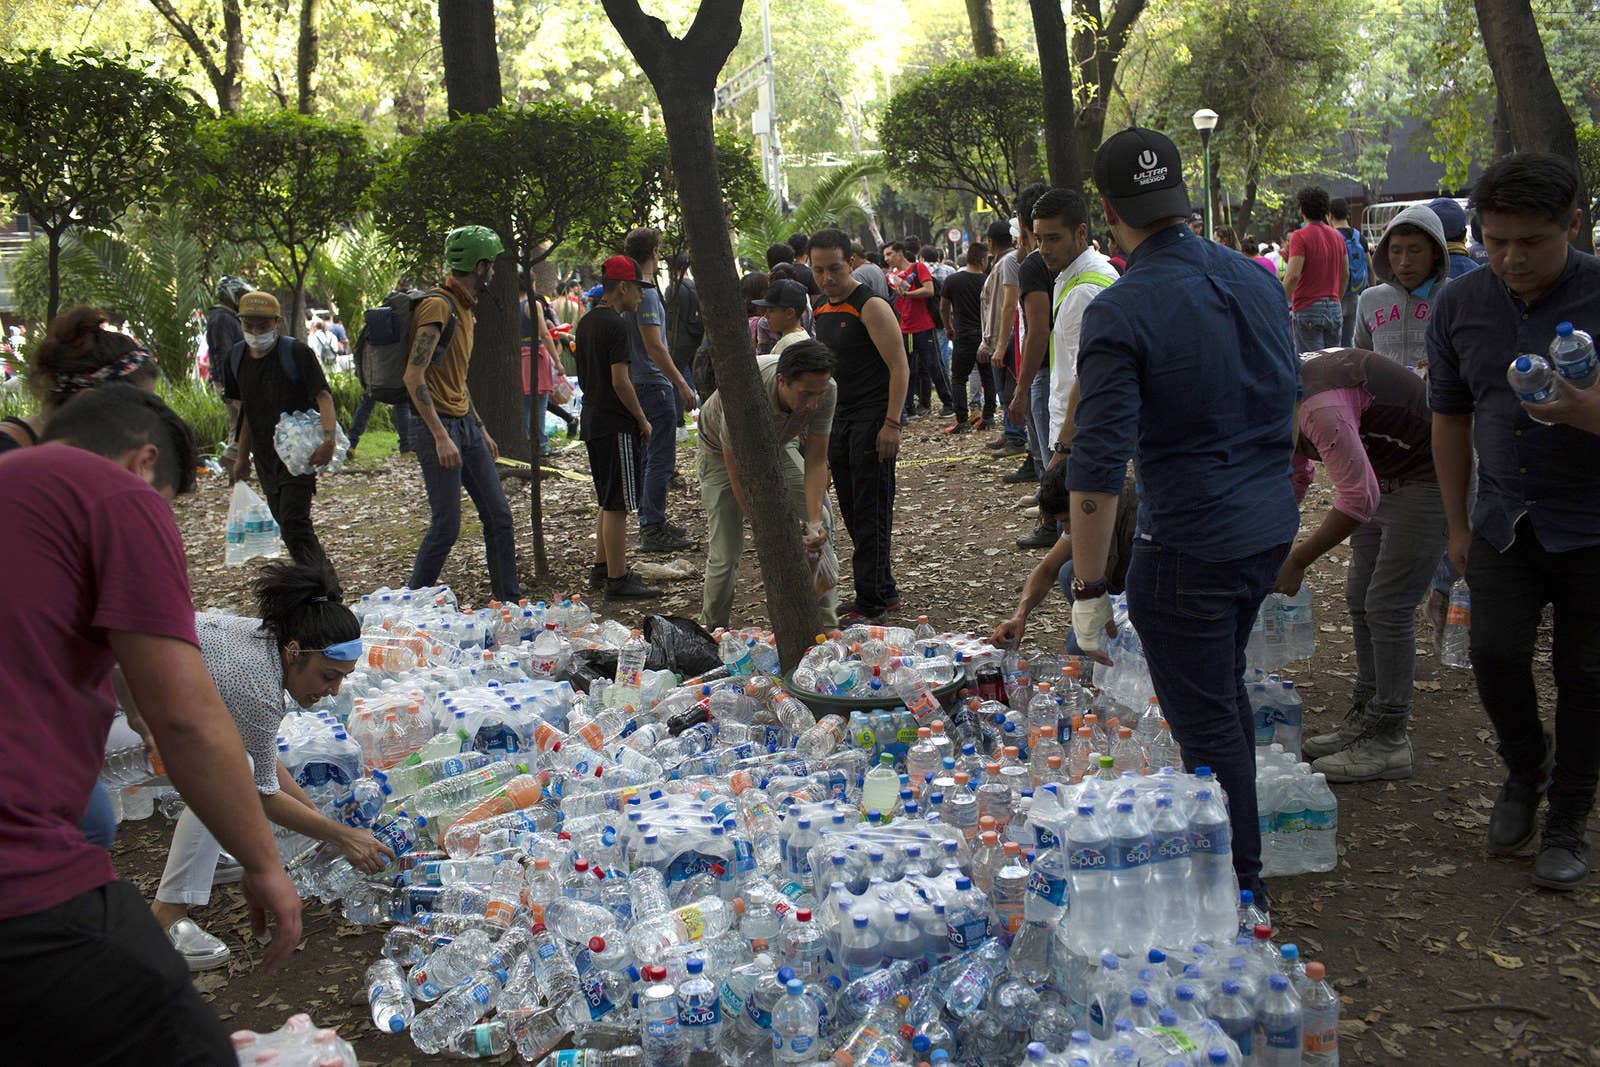 Bottled water is distributed to rescuers and victims in Mexico City.